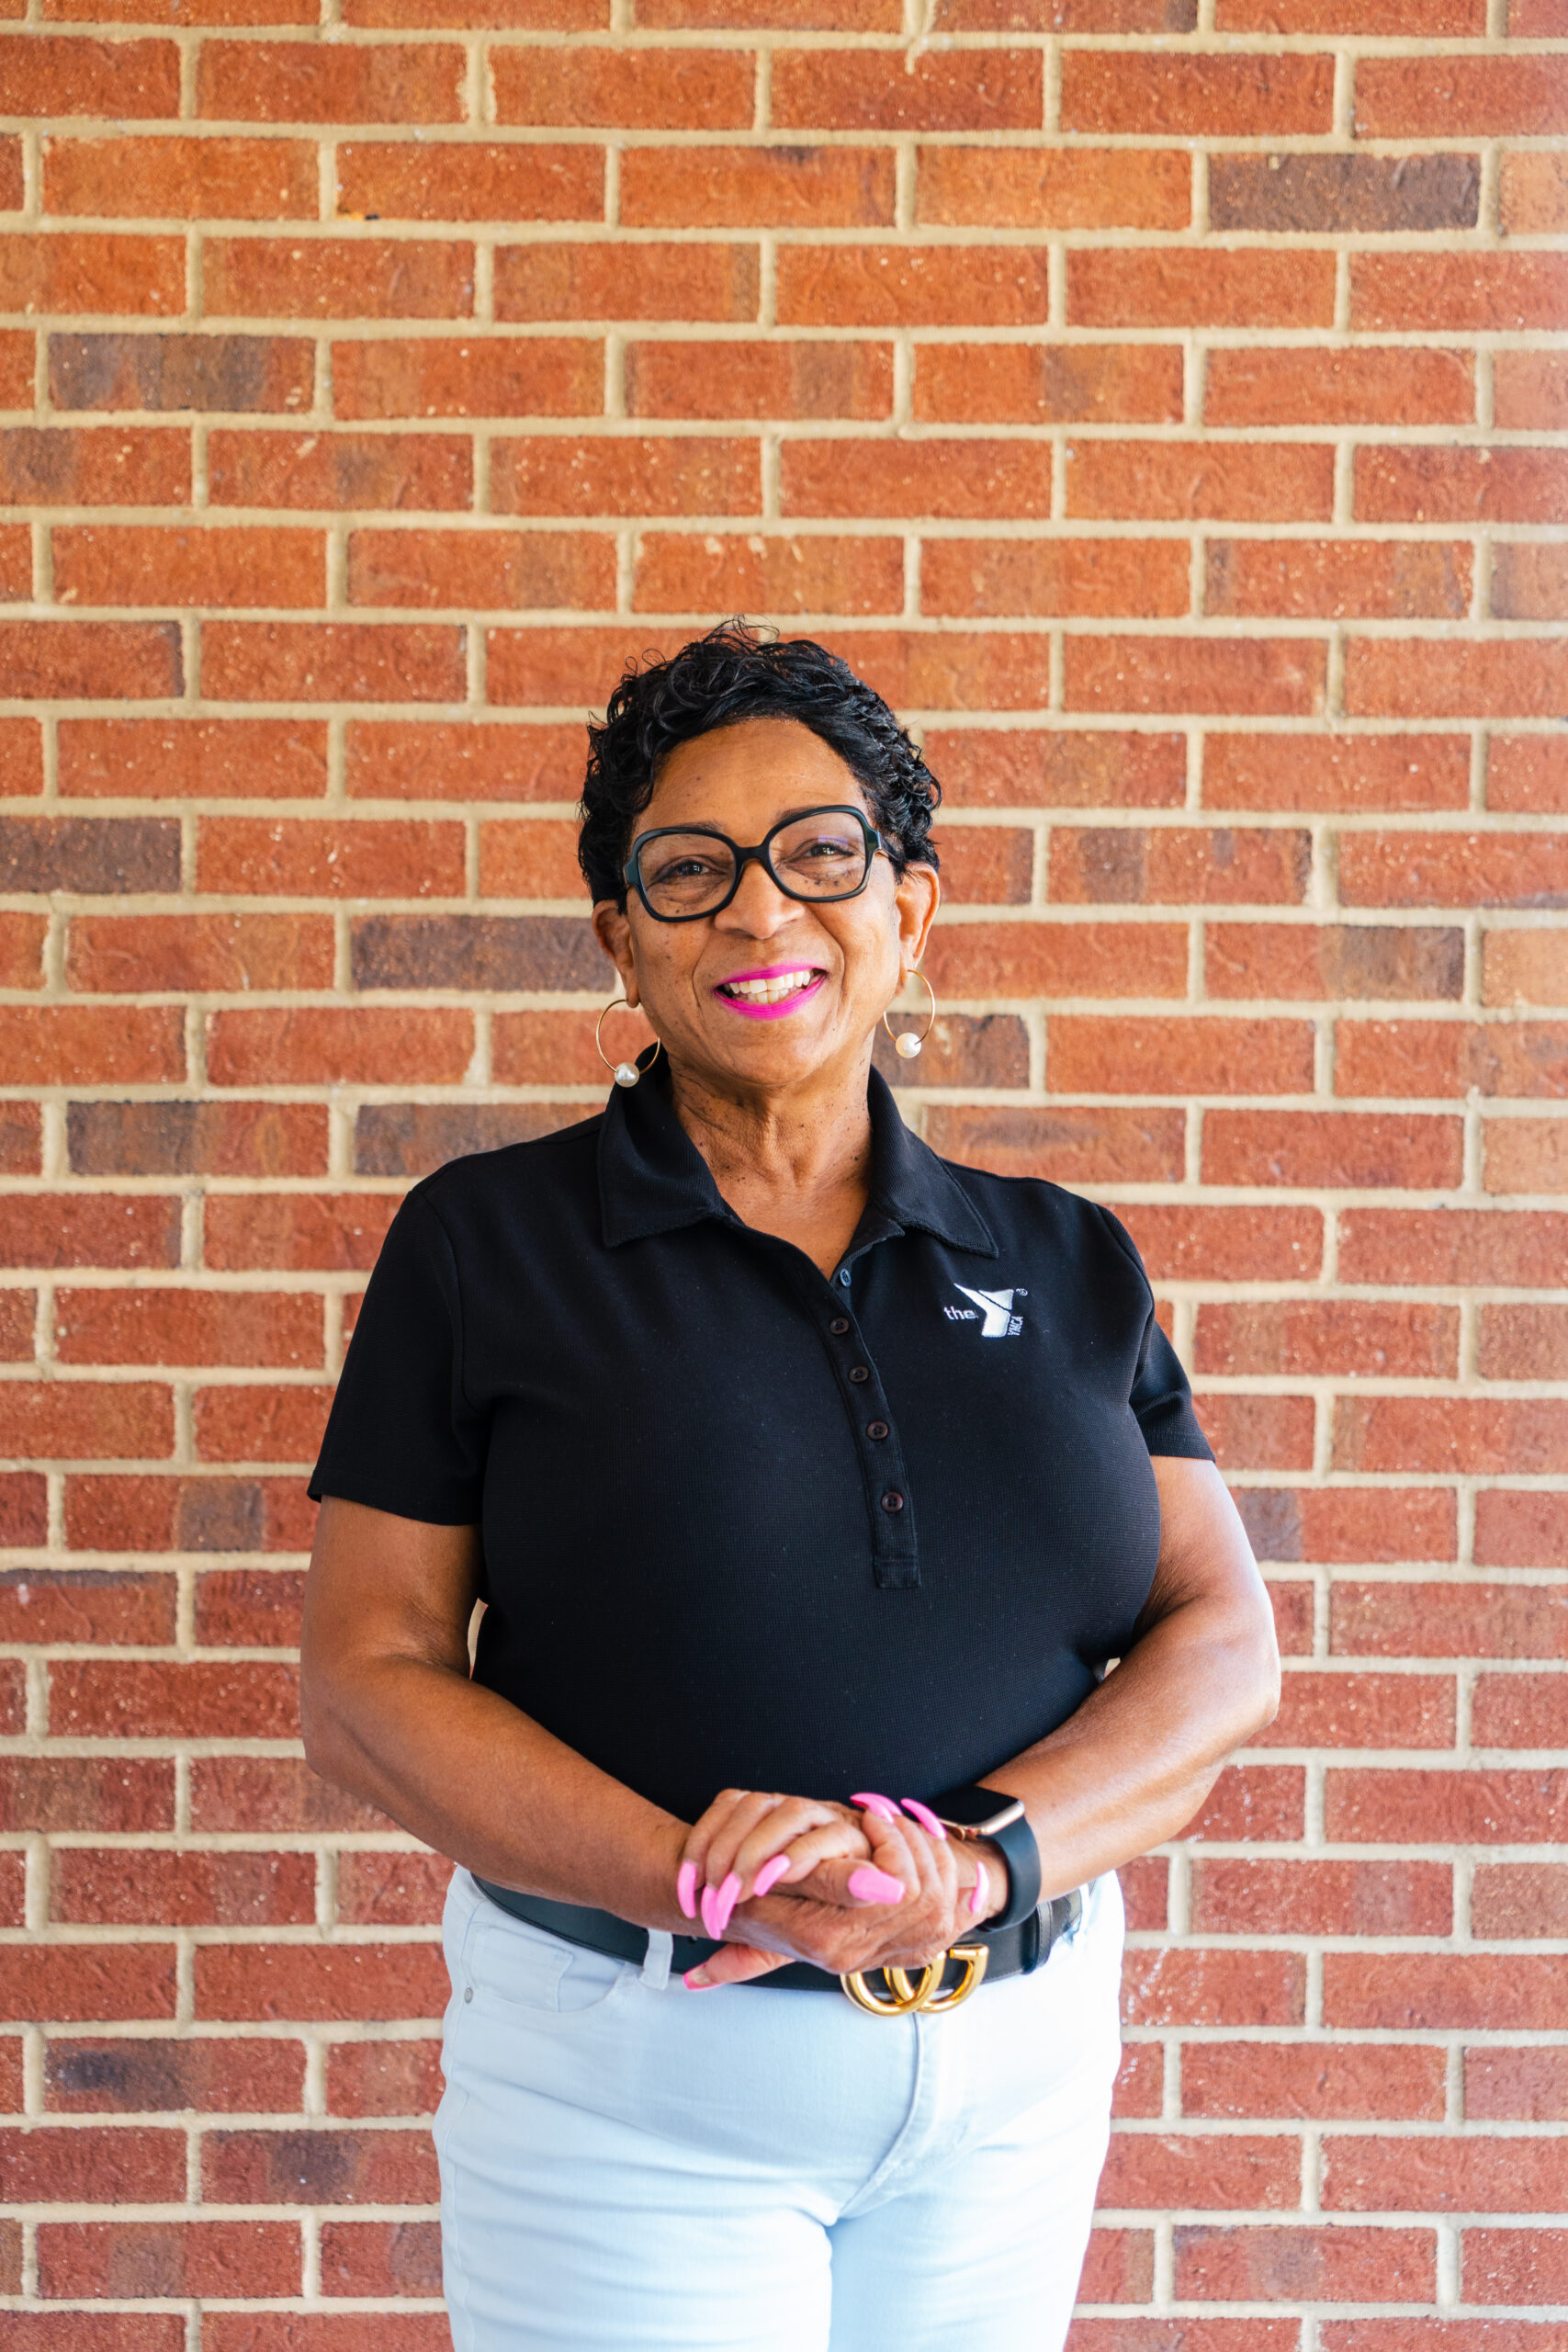 Carlvena Foster, Vice President of the Carl Chavis YMCA in High Point, NC.